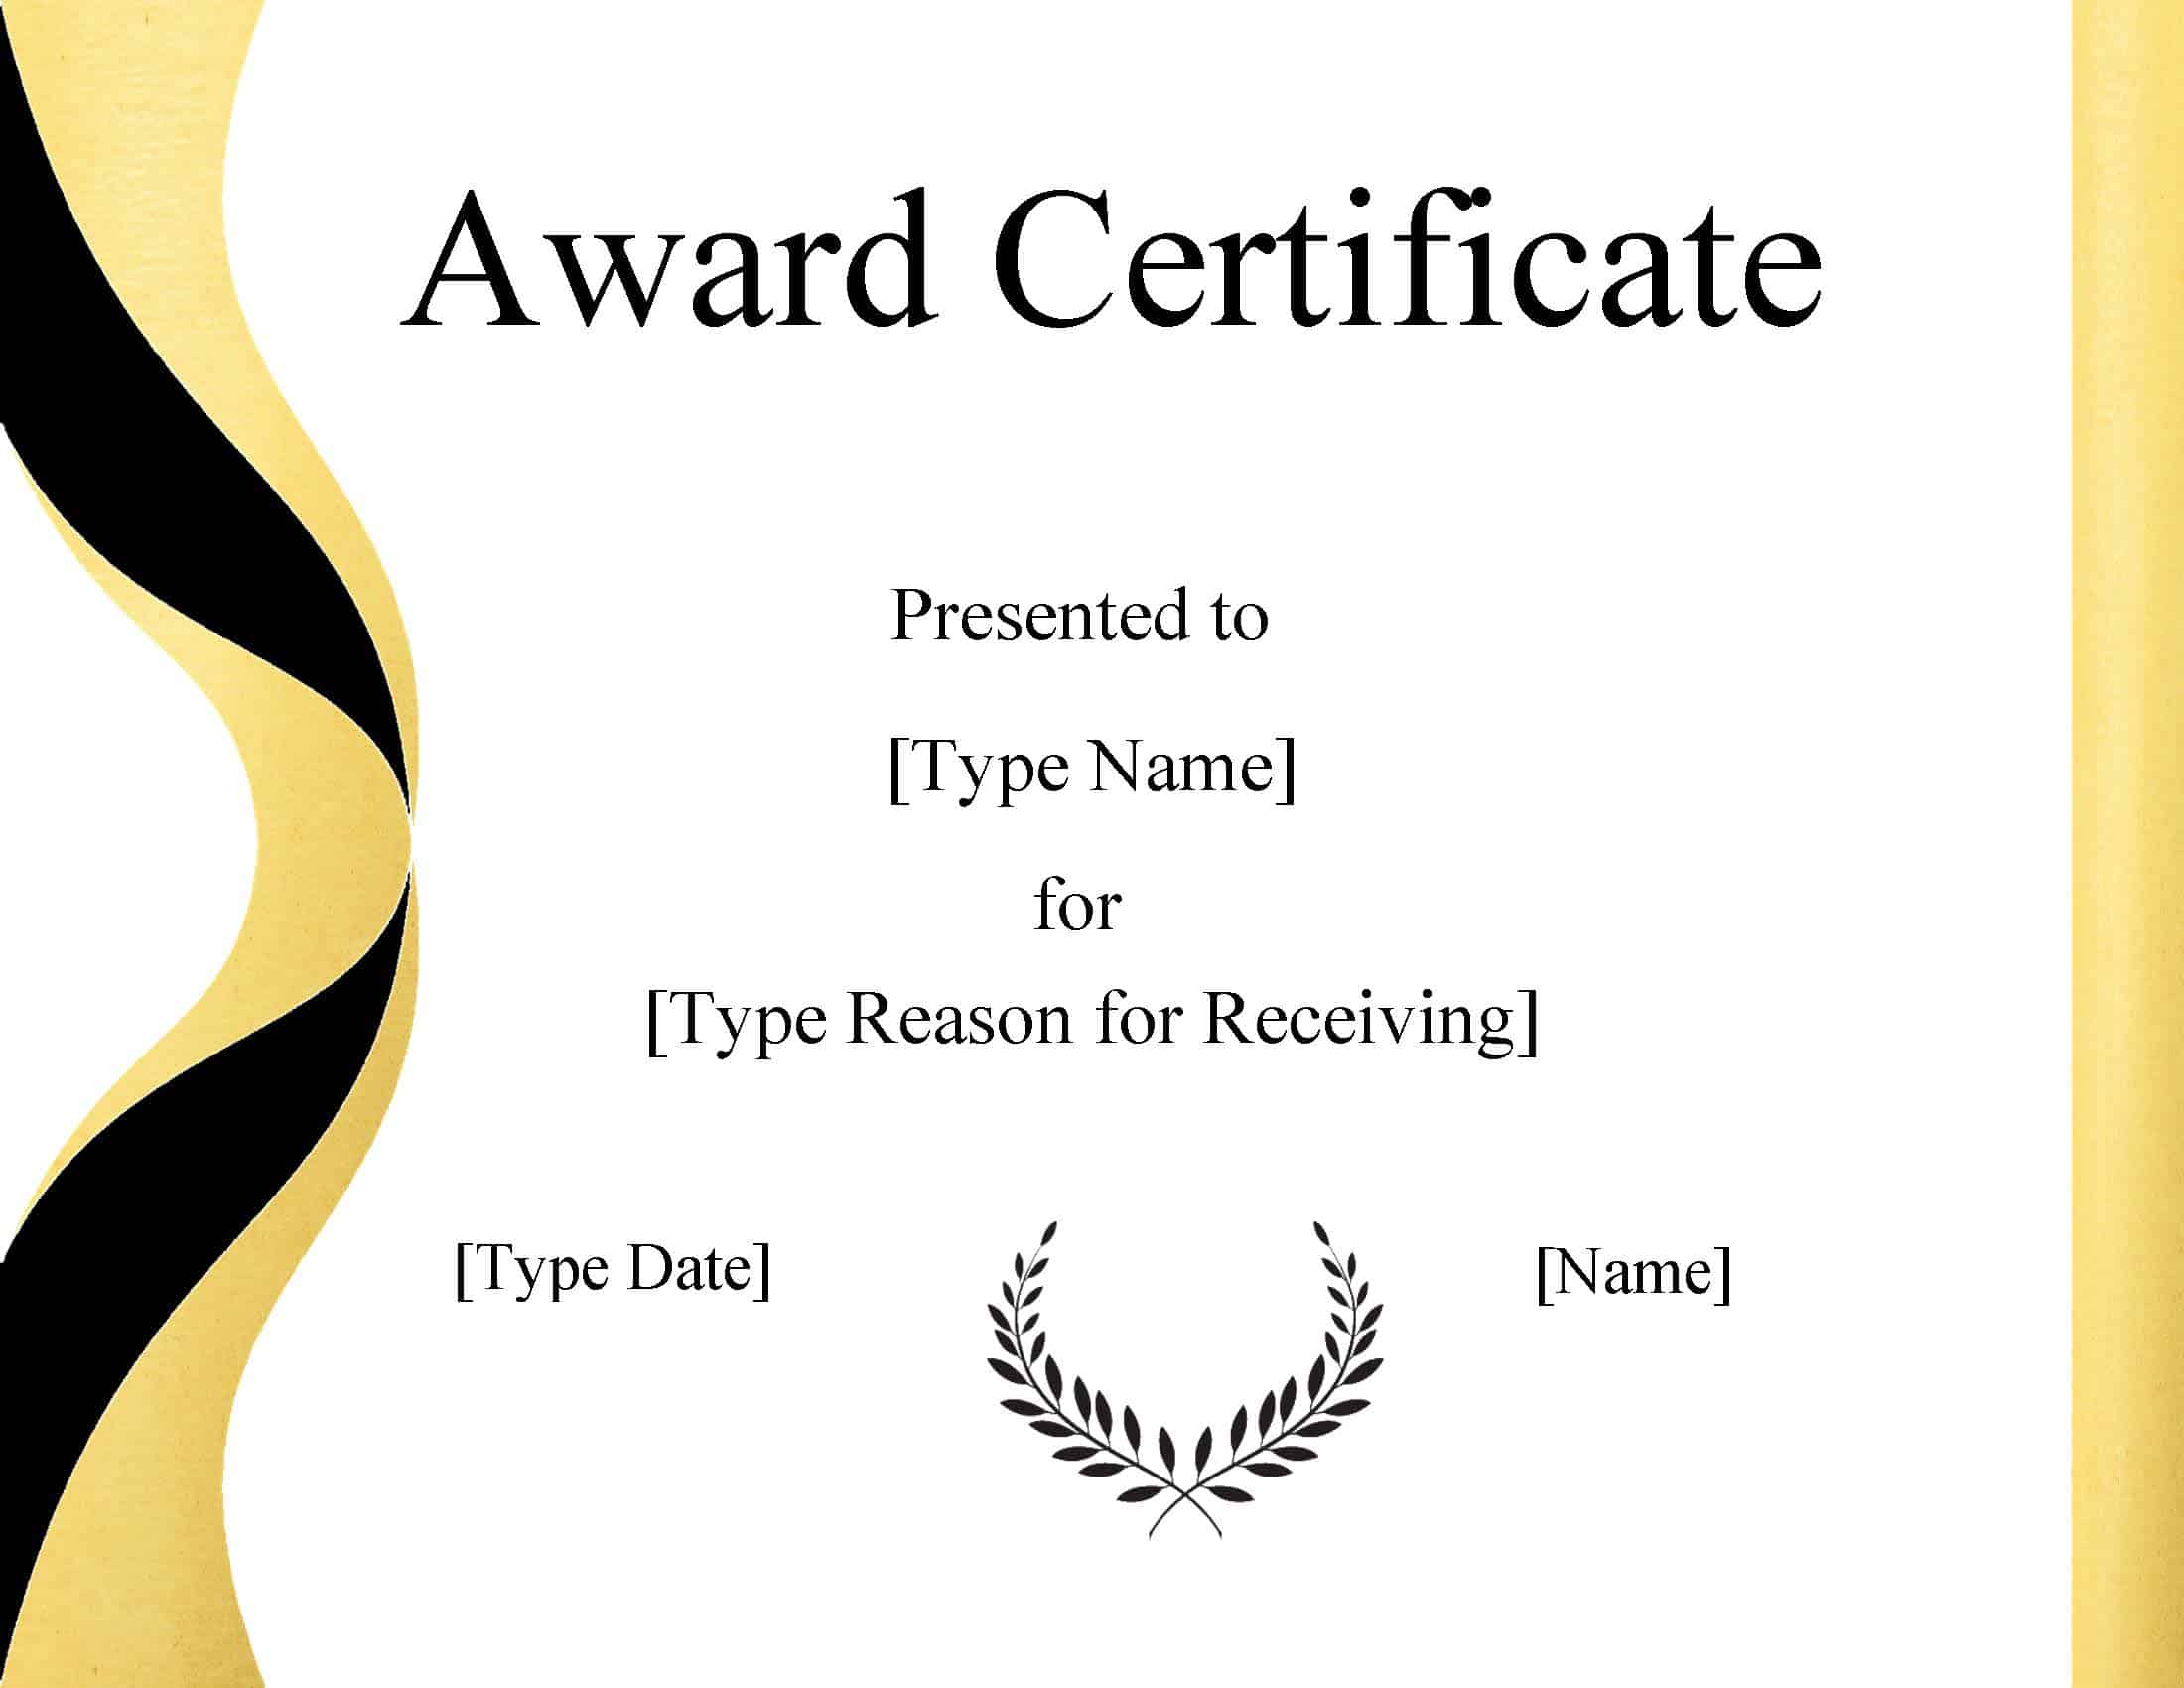 FREE Certificate Template Powerpoint  Instant Download Inside Award Certificate Template Powerpoint